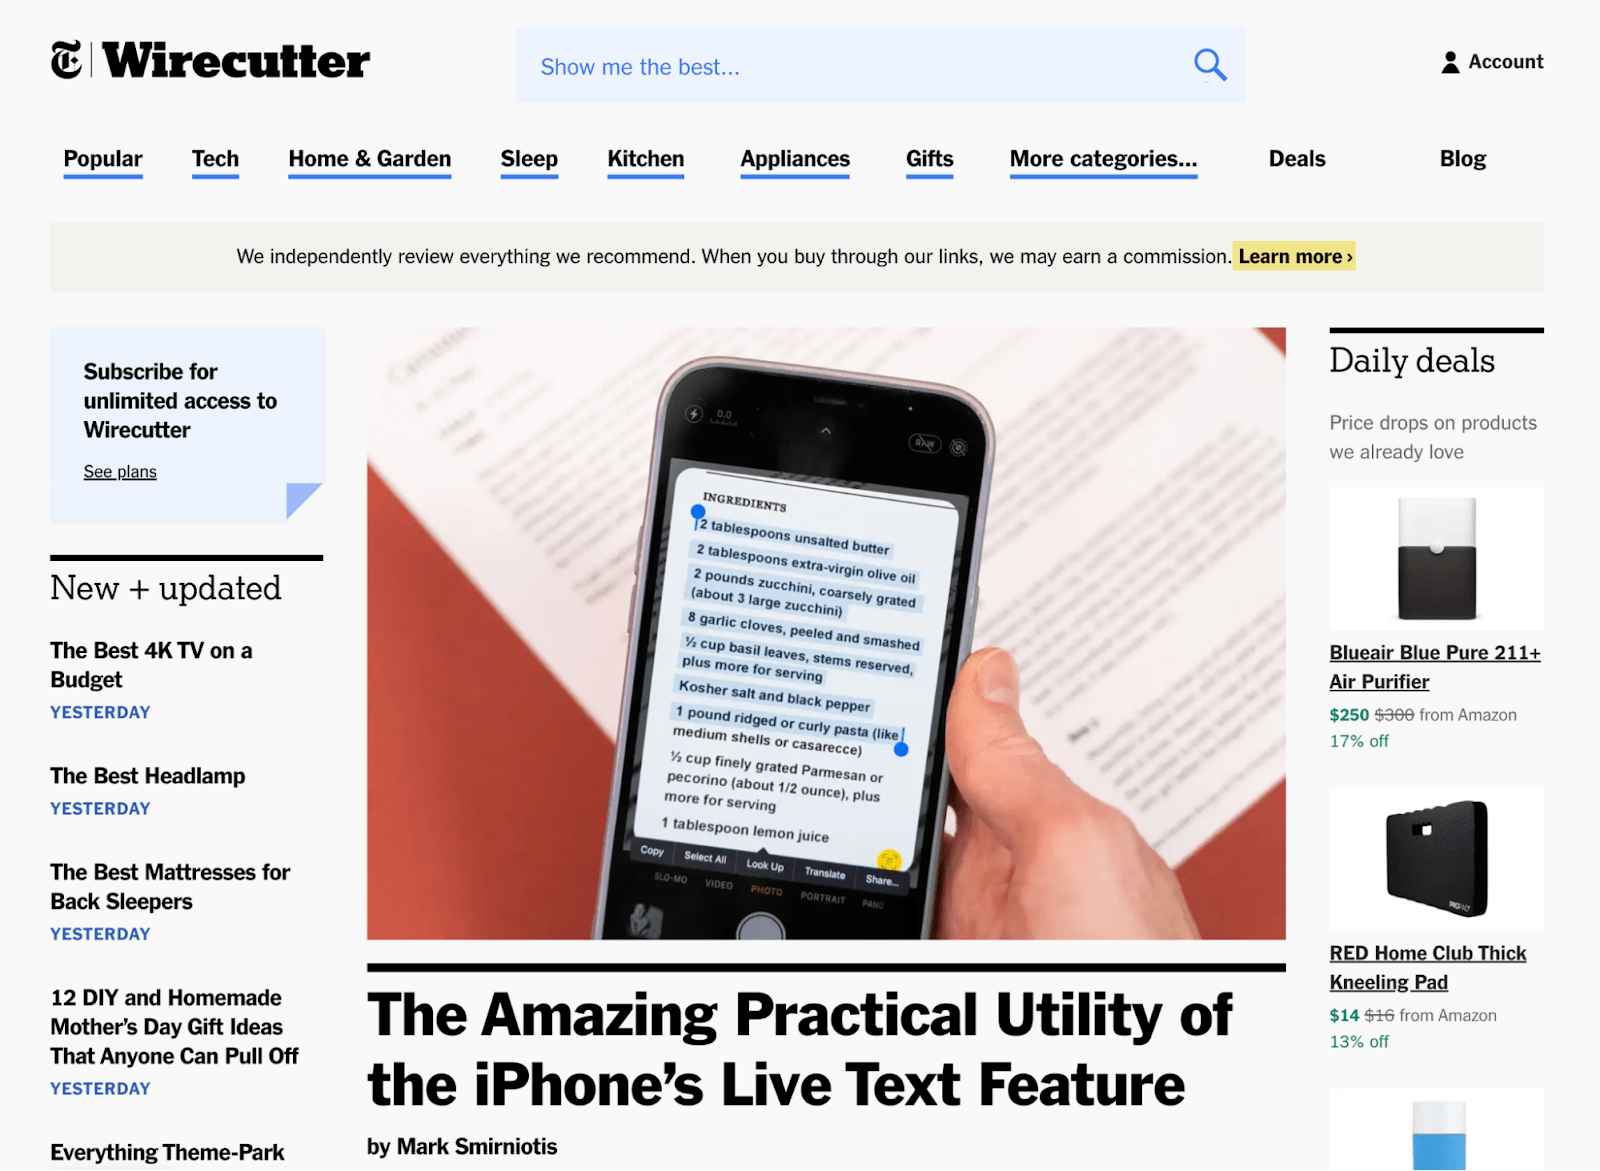 "Learn More" anchor text contains link to Wirecutter's About page